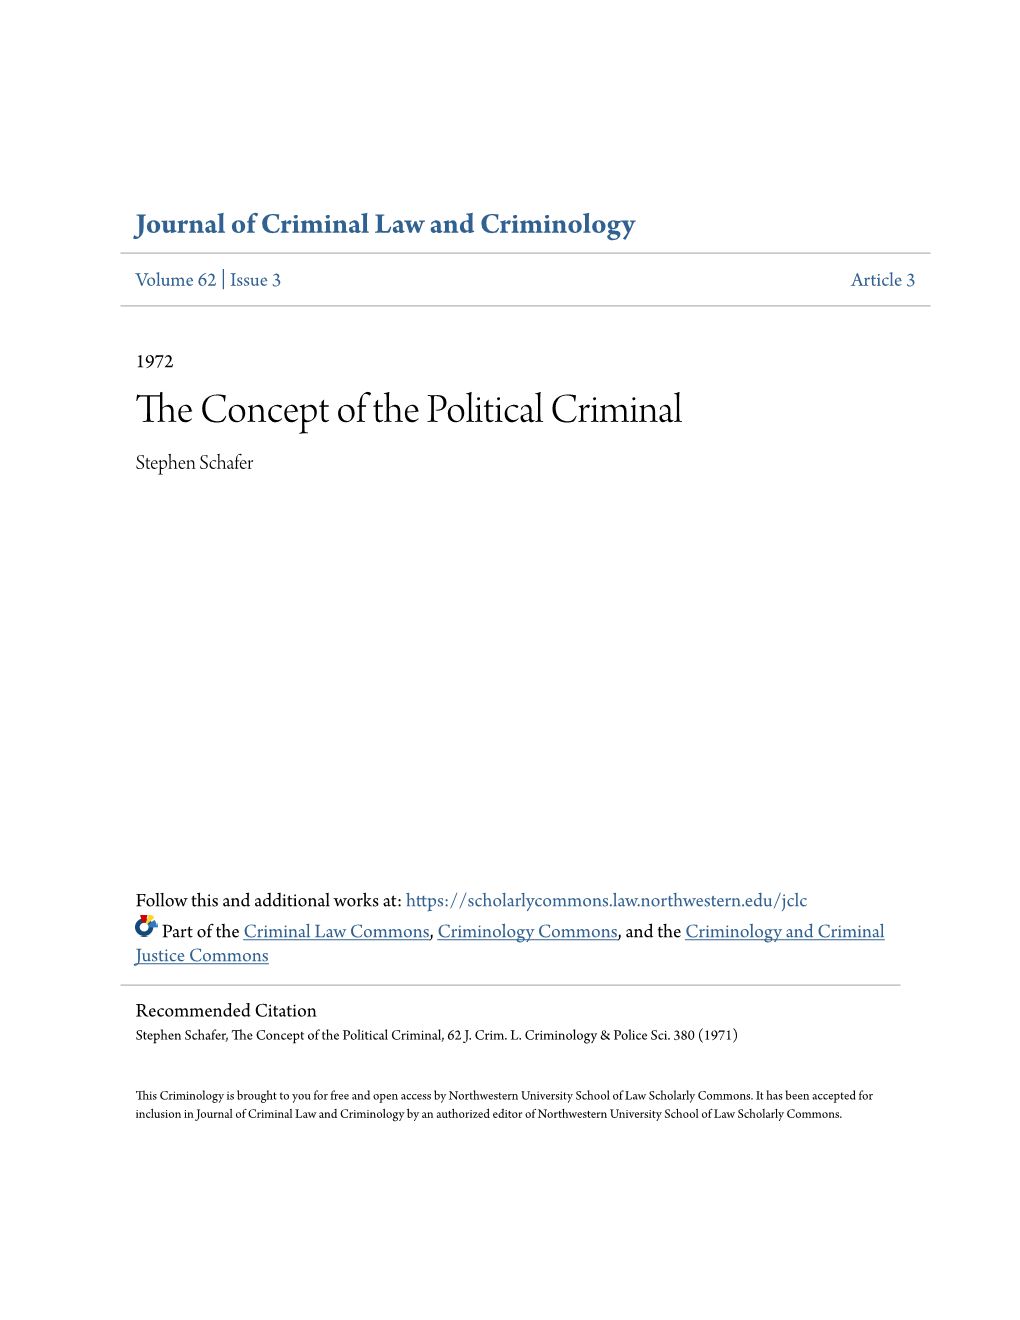 The Concept of the Political Criminal